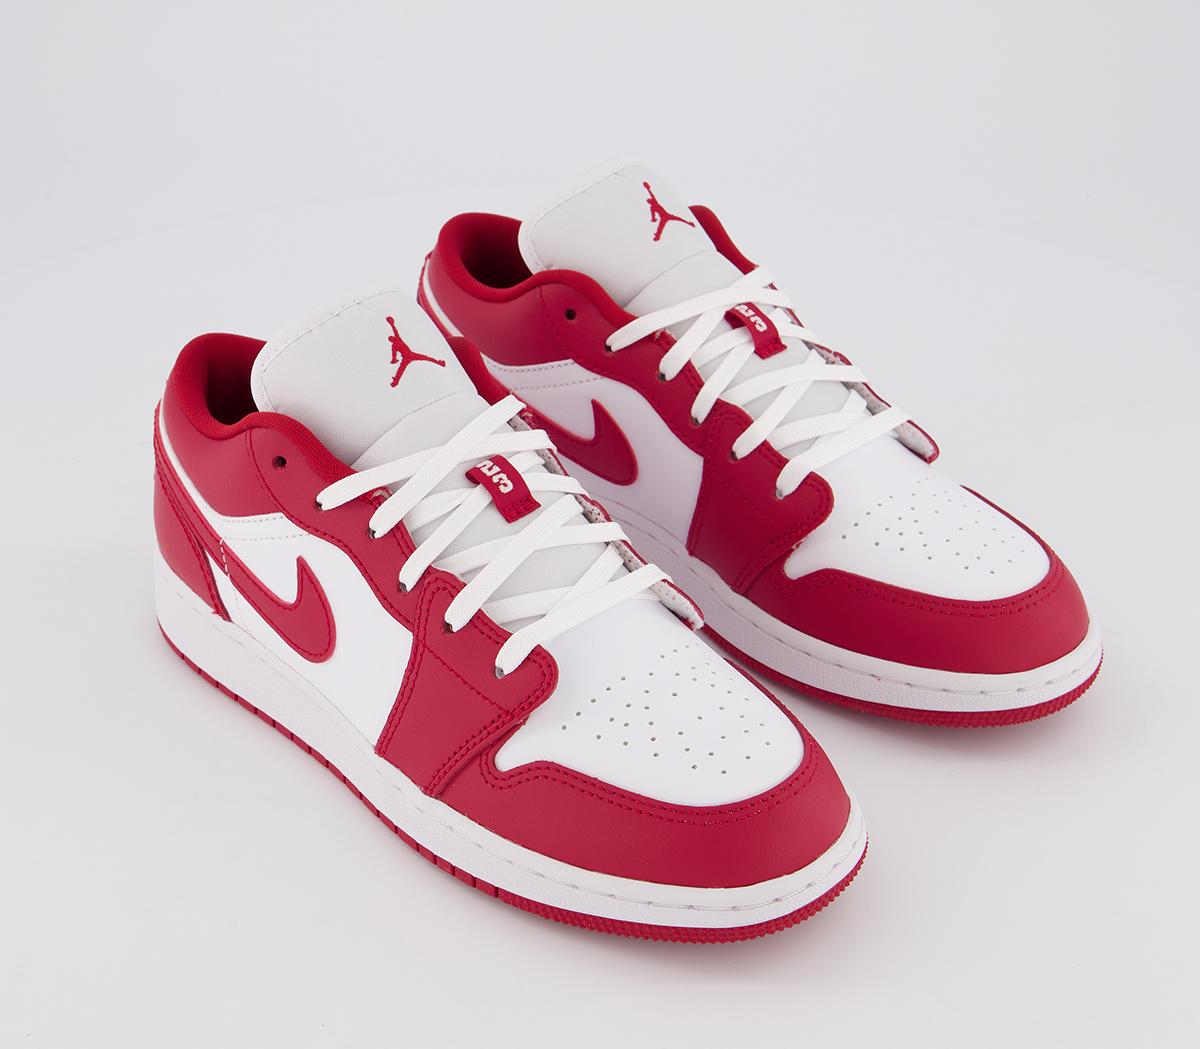 Jordan Air Jordan 1 Low Gs Trainers Gym Red White - Hers trainers